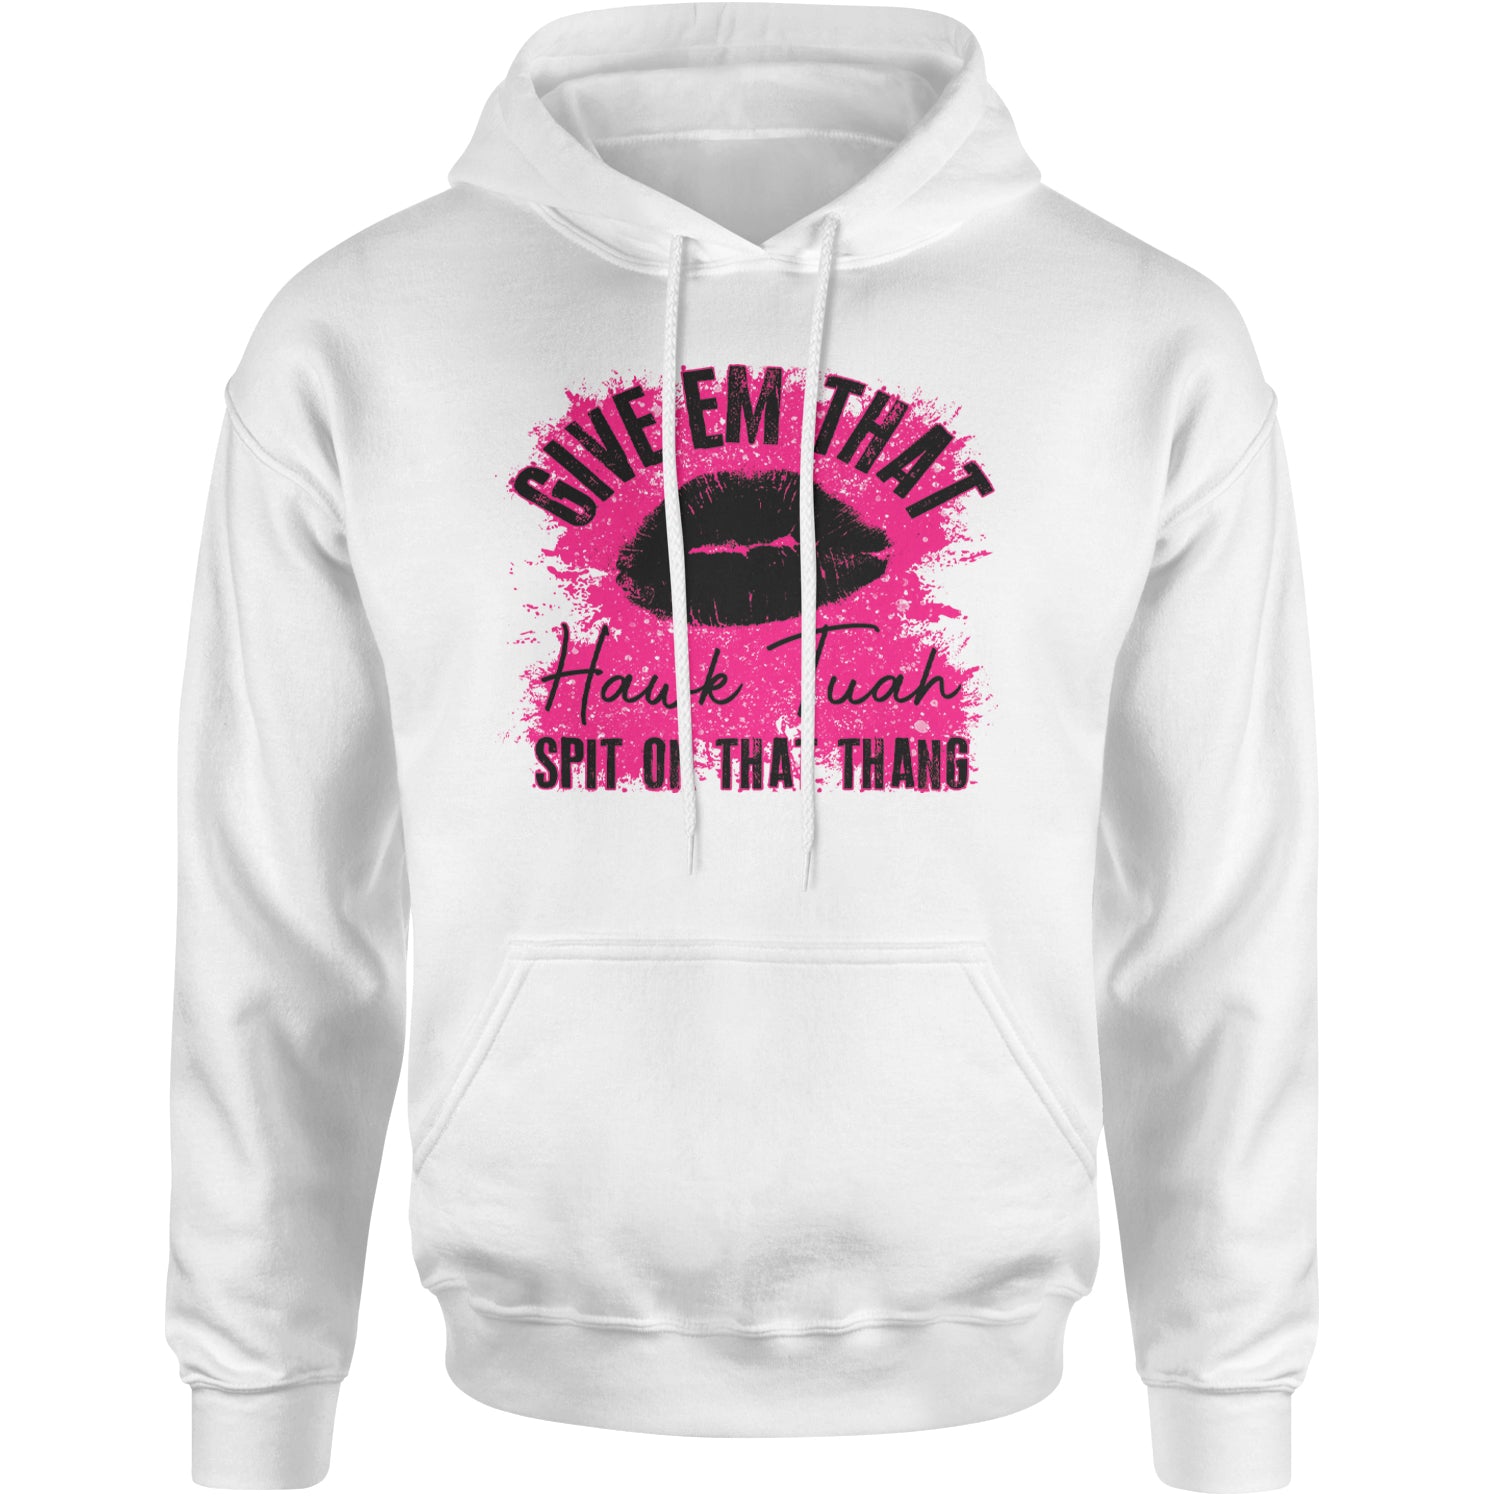 Give 'Em Hawk Tuah Spit On That Thang Adult Hoodie Sweatshirt White